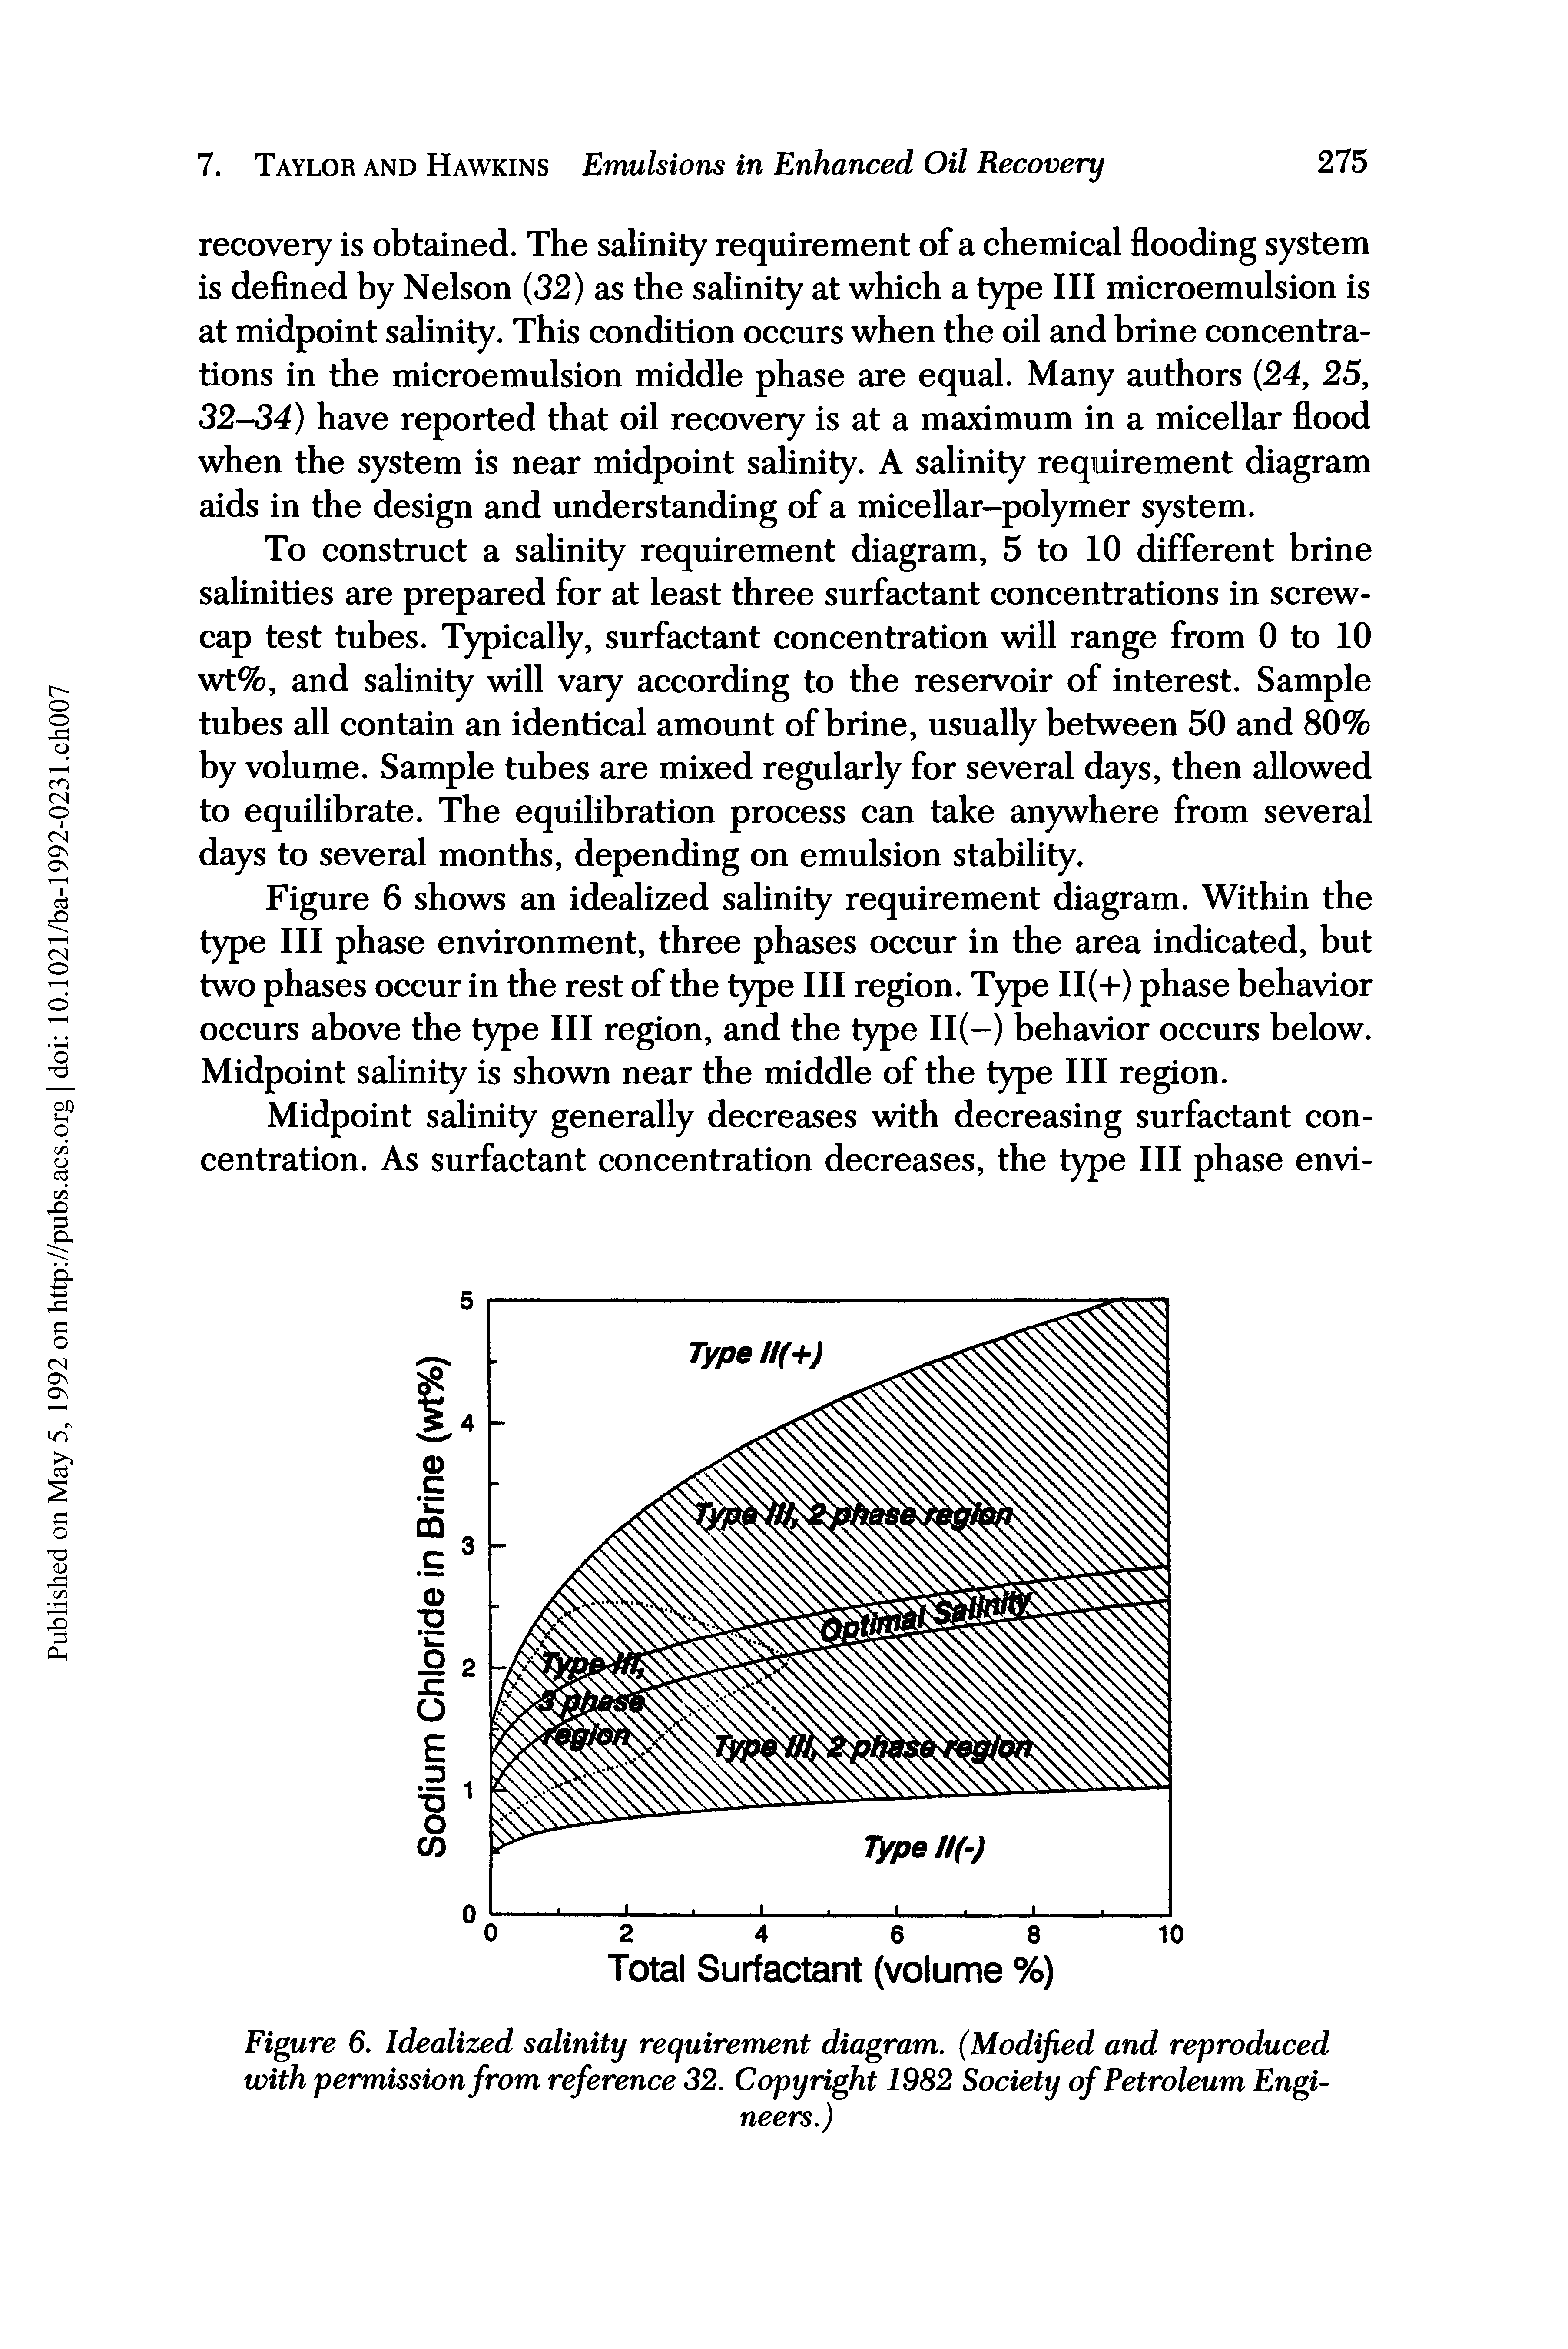 Figure 6, Idealized salinity requirement diagram. (Modified and reproduced with permission from reference 32. Copyright 1982 Society of Petroleum Engineers.)...